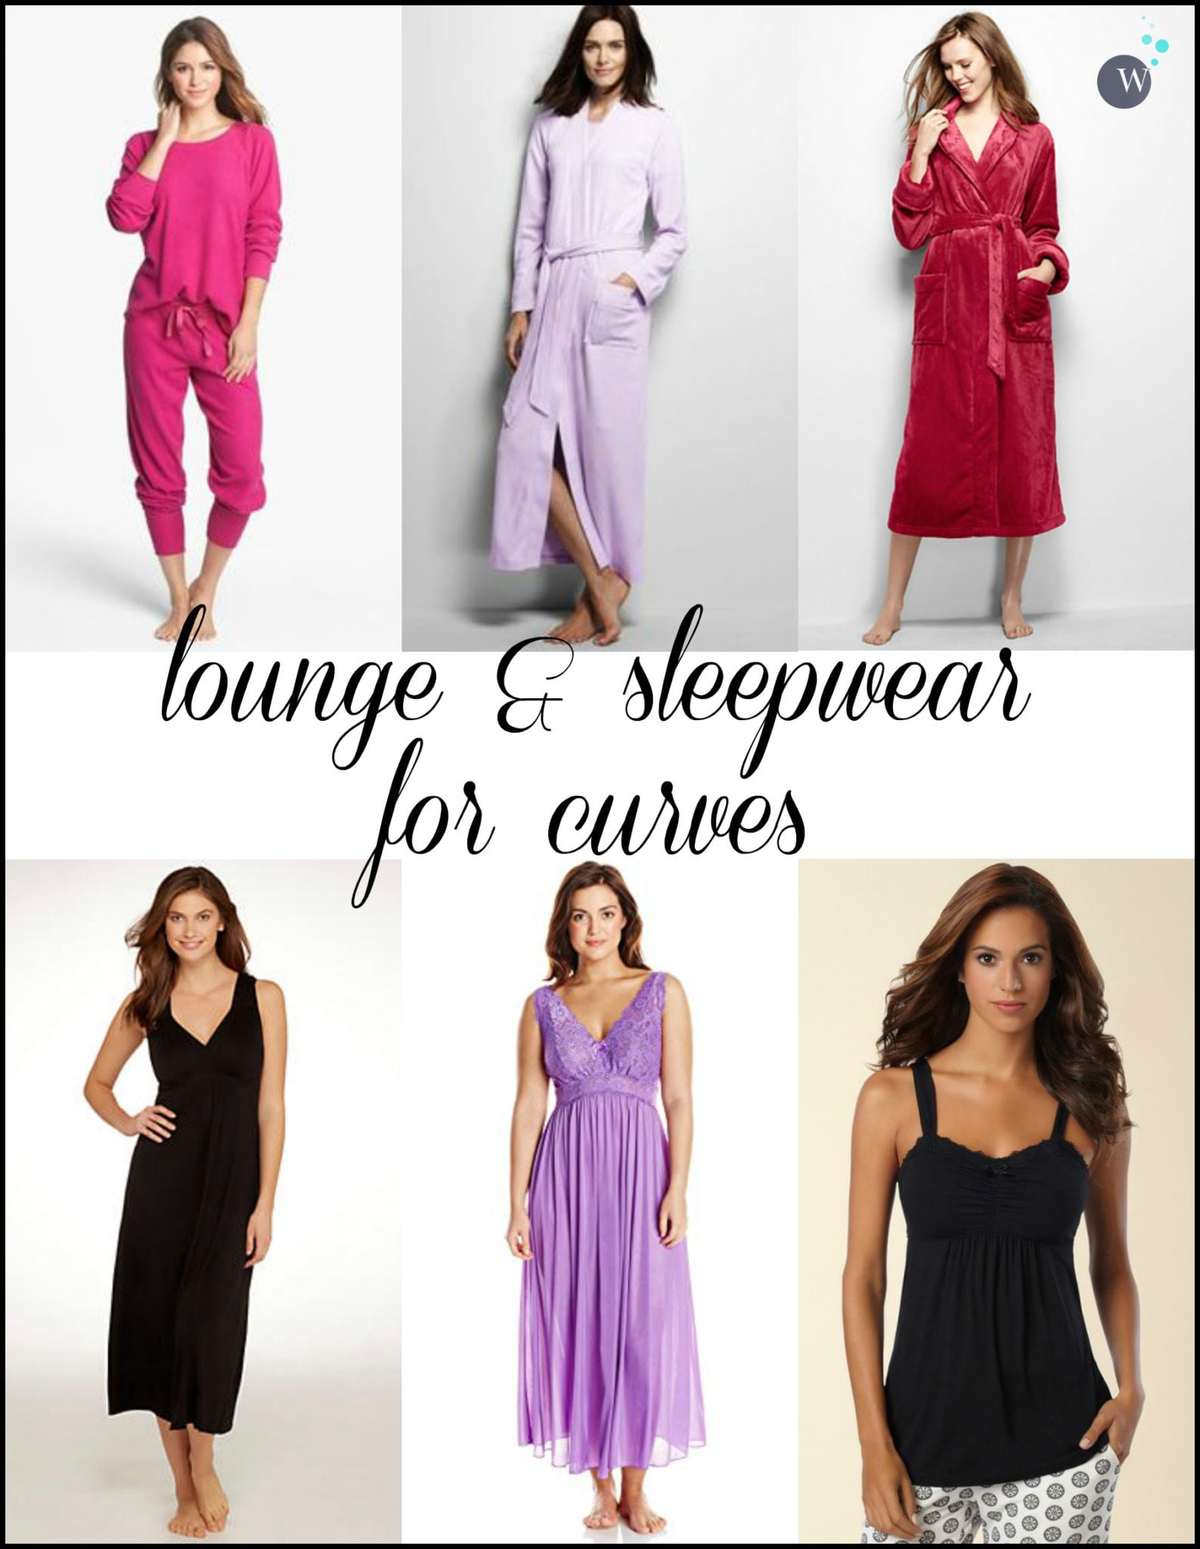 Best Loungewear and Sleepwear Large Busts and Curves